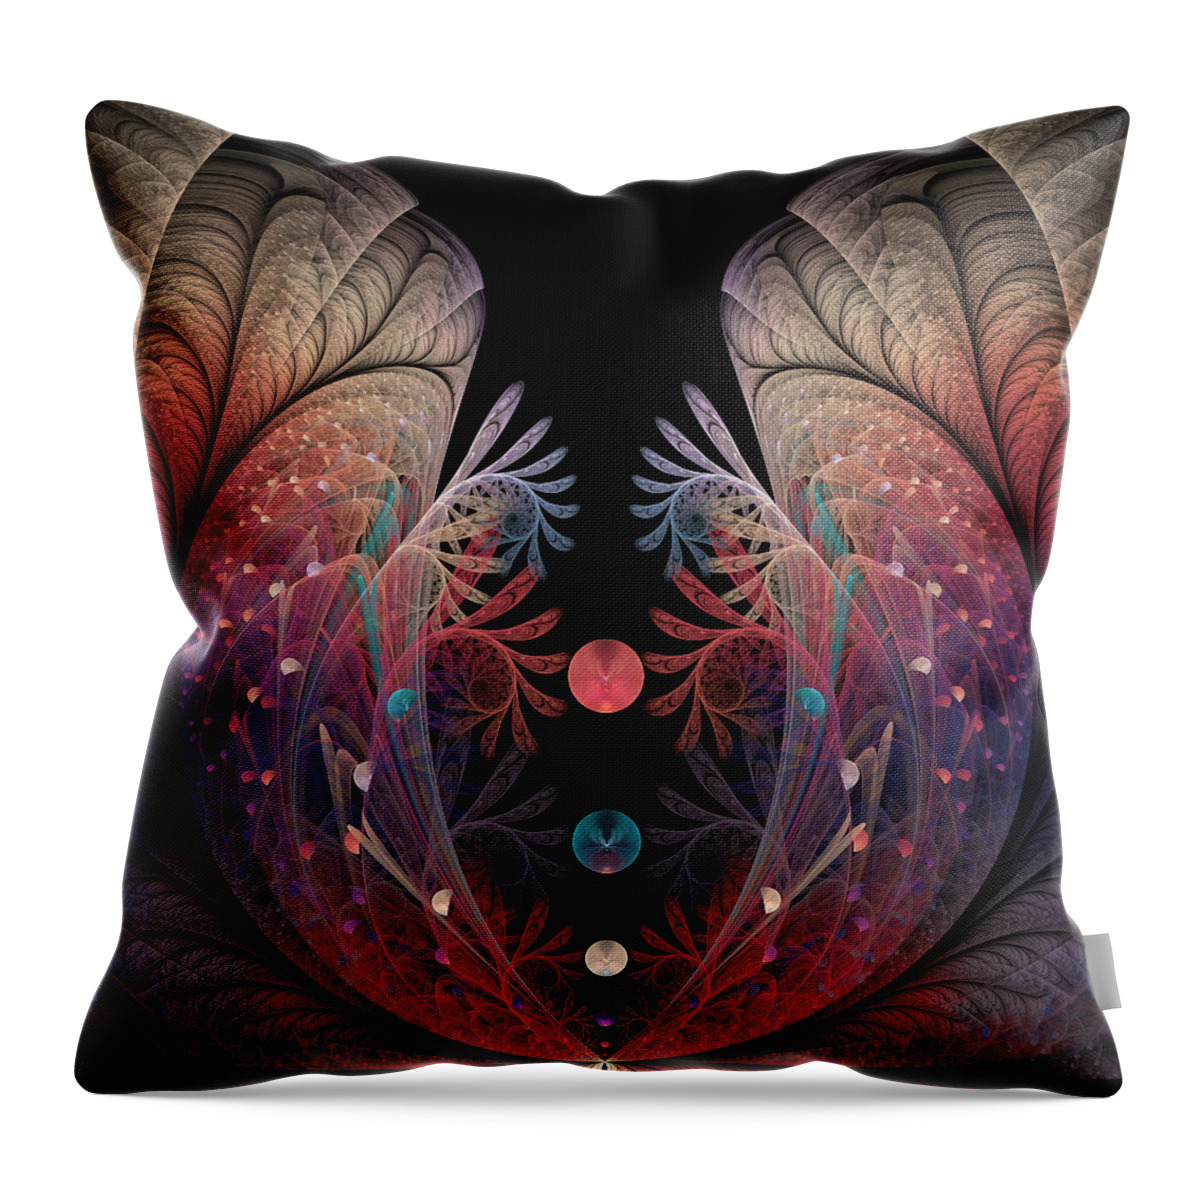 Abstract Throw Pillow featuring the digital art Juggling by Gabiw Art